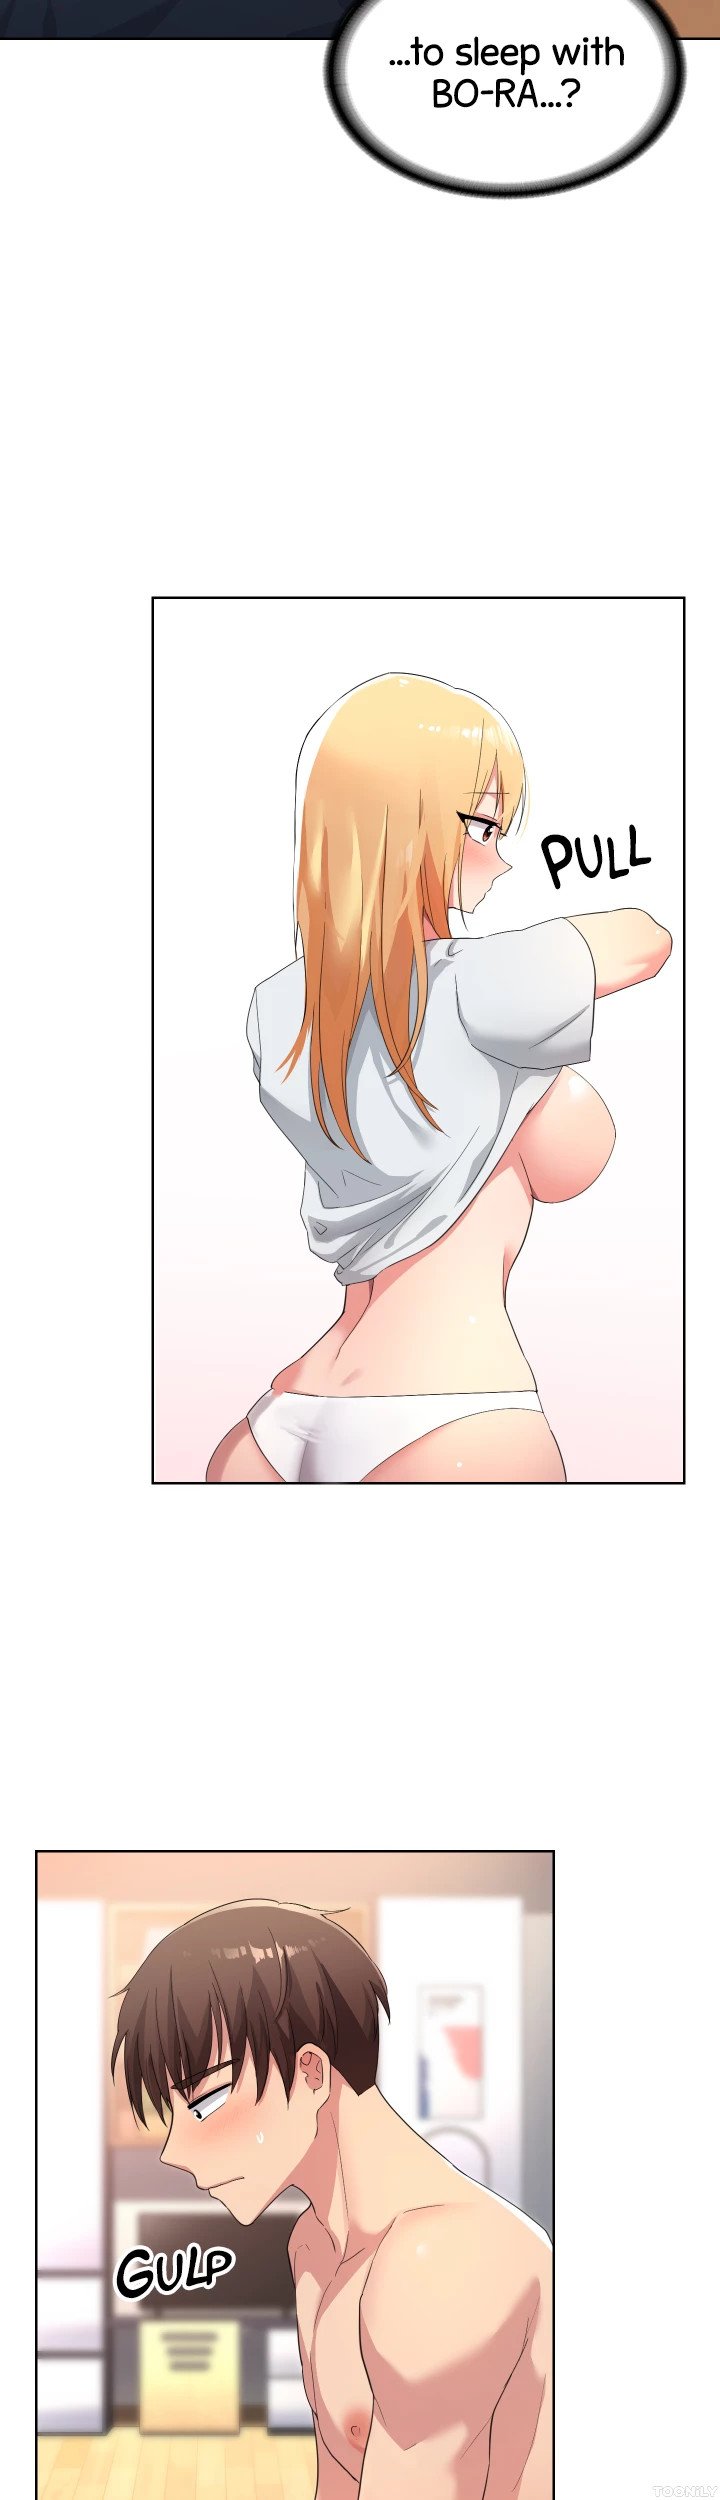 girls-i-used-to-teach-chap-4-7